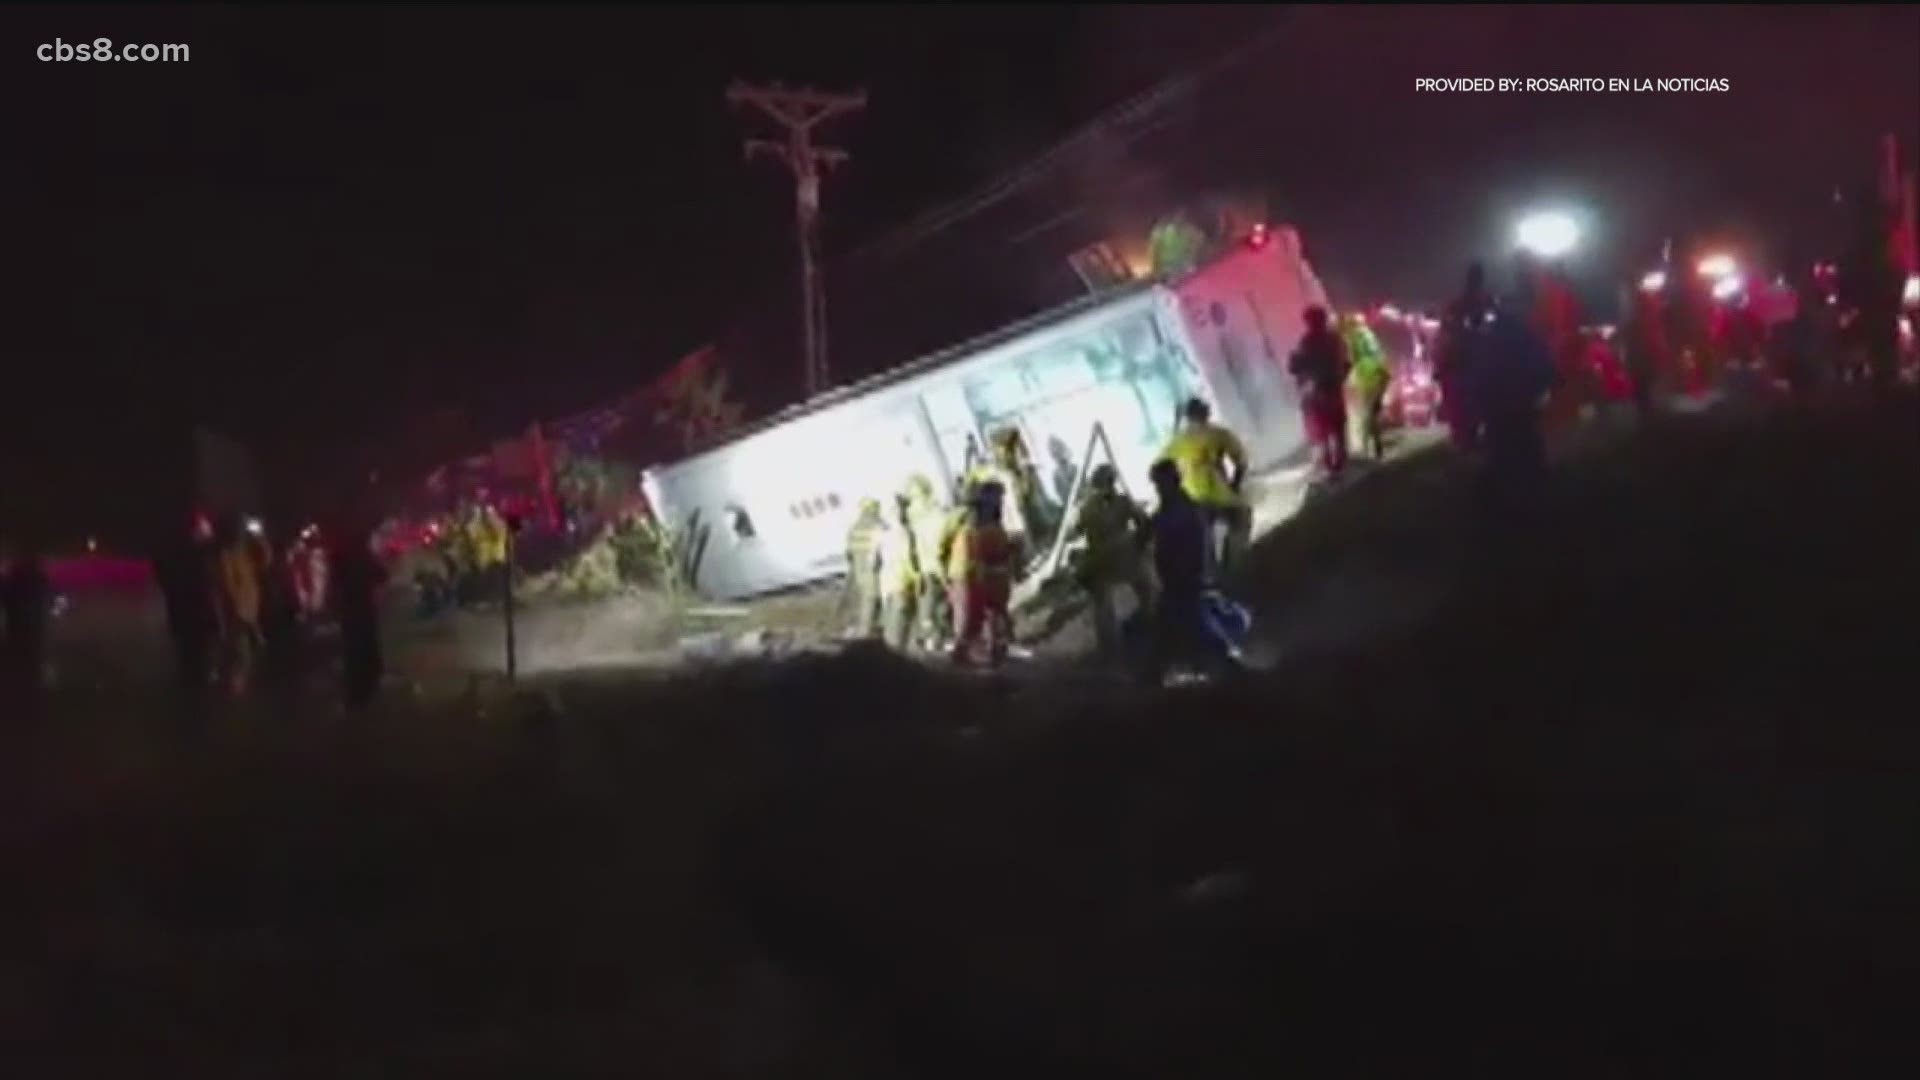 A private bus chartered for a day of fun in Mexico flipped over near Rosarito Tuesday night, killing at least seven people and injuring more than 30.